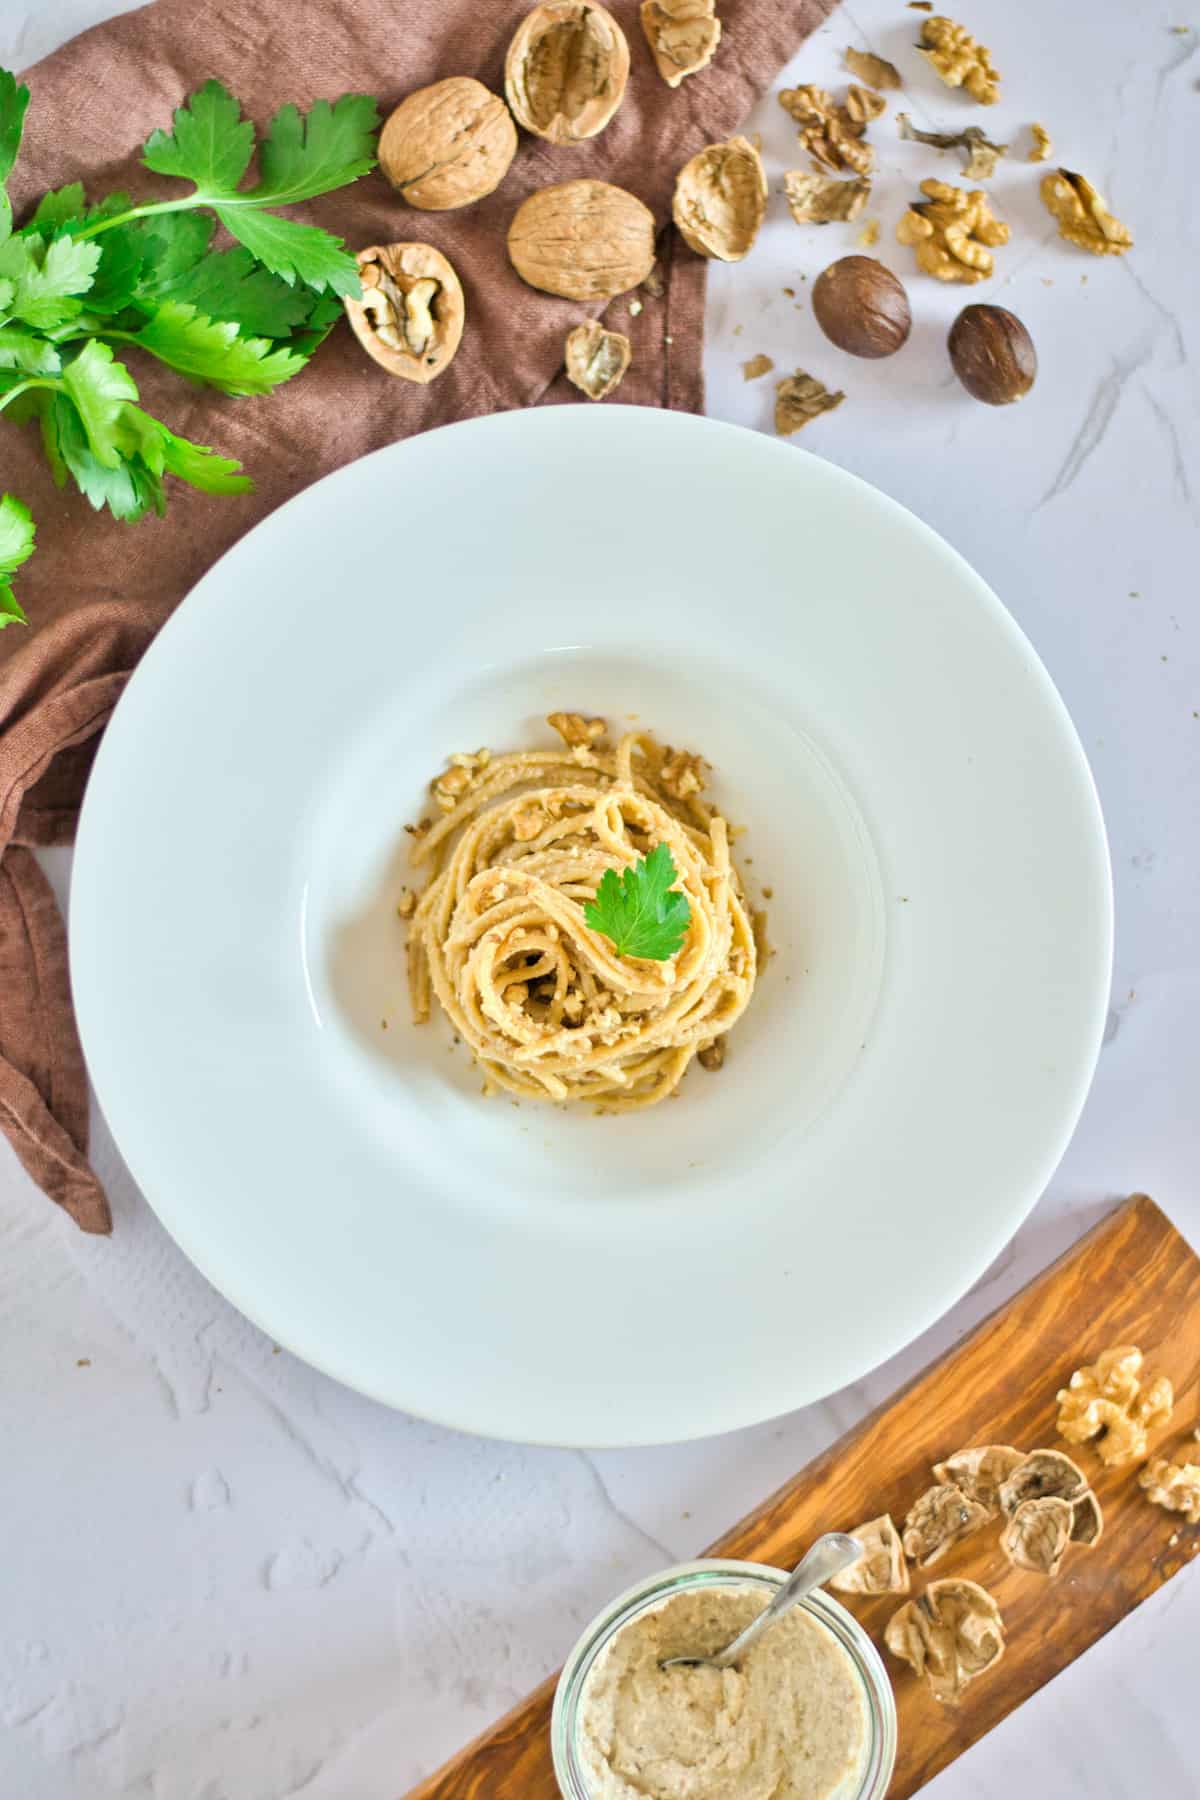 Walnut sauce with pasta in a white dish.